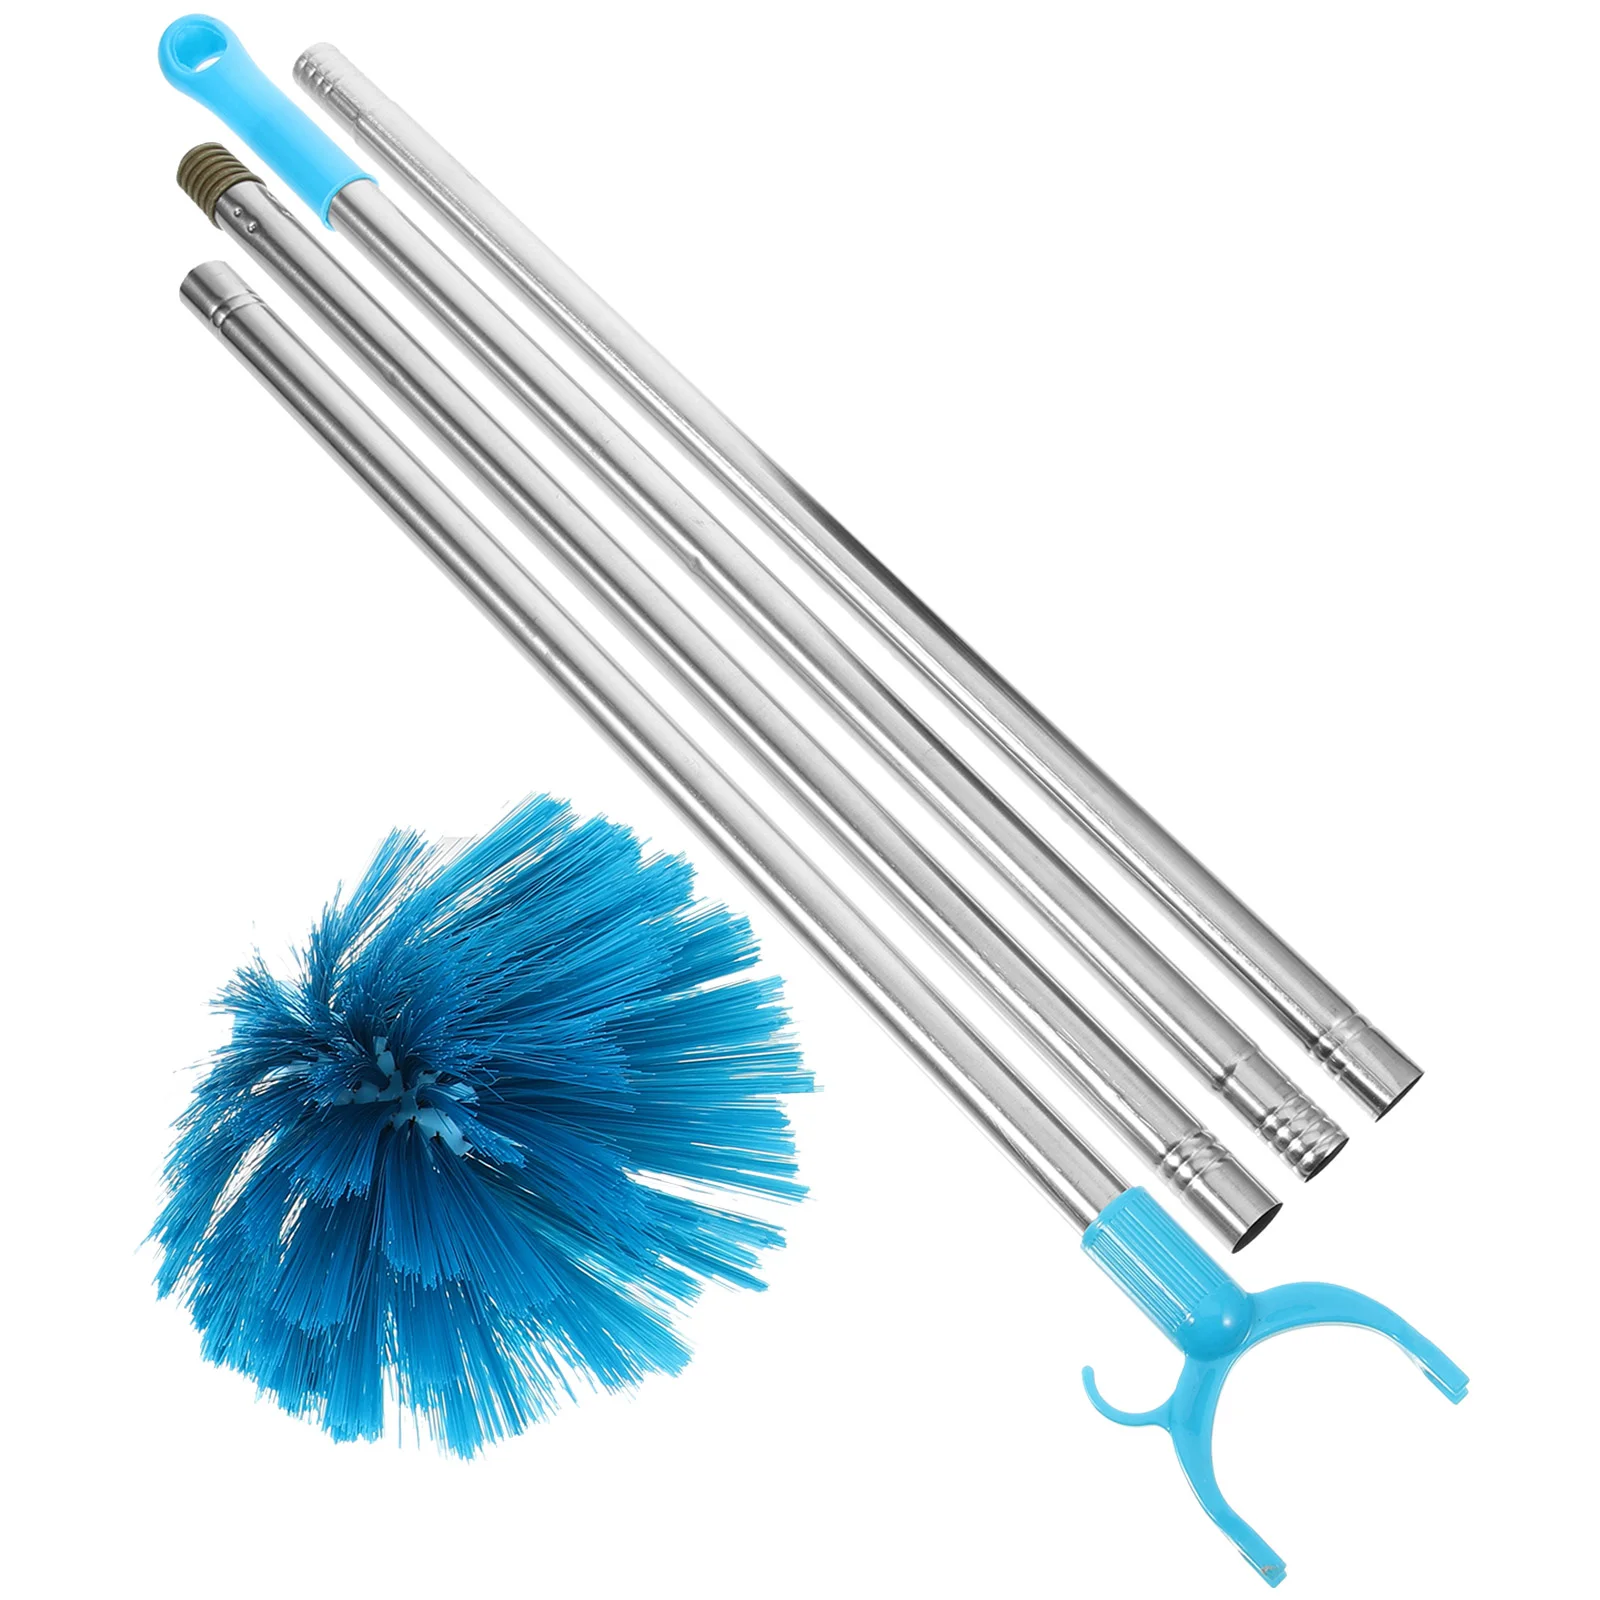 

Telescopic Dust Brush Stainless Steel Cleaner Cobweb with Extension Pole Dusting Fan Extended Duster Spider Ceiling for